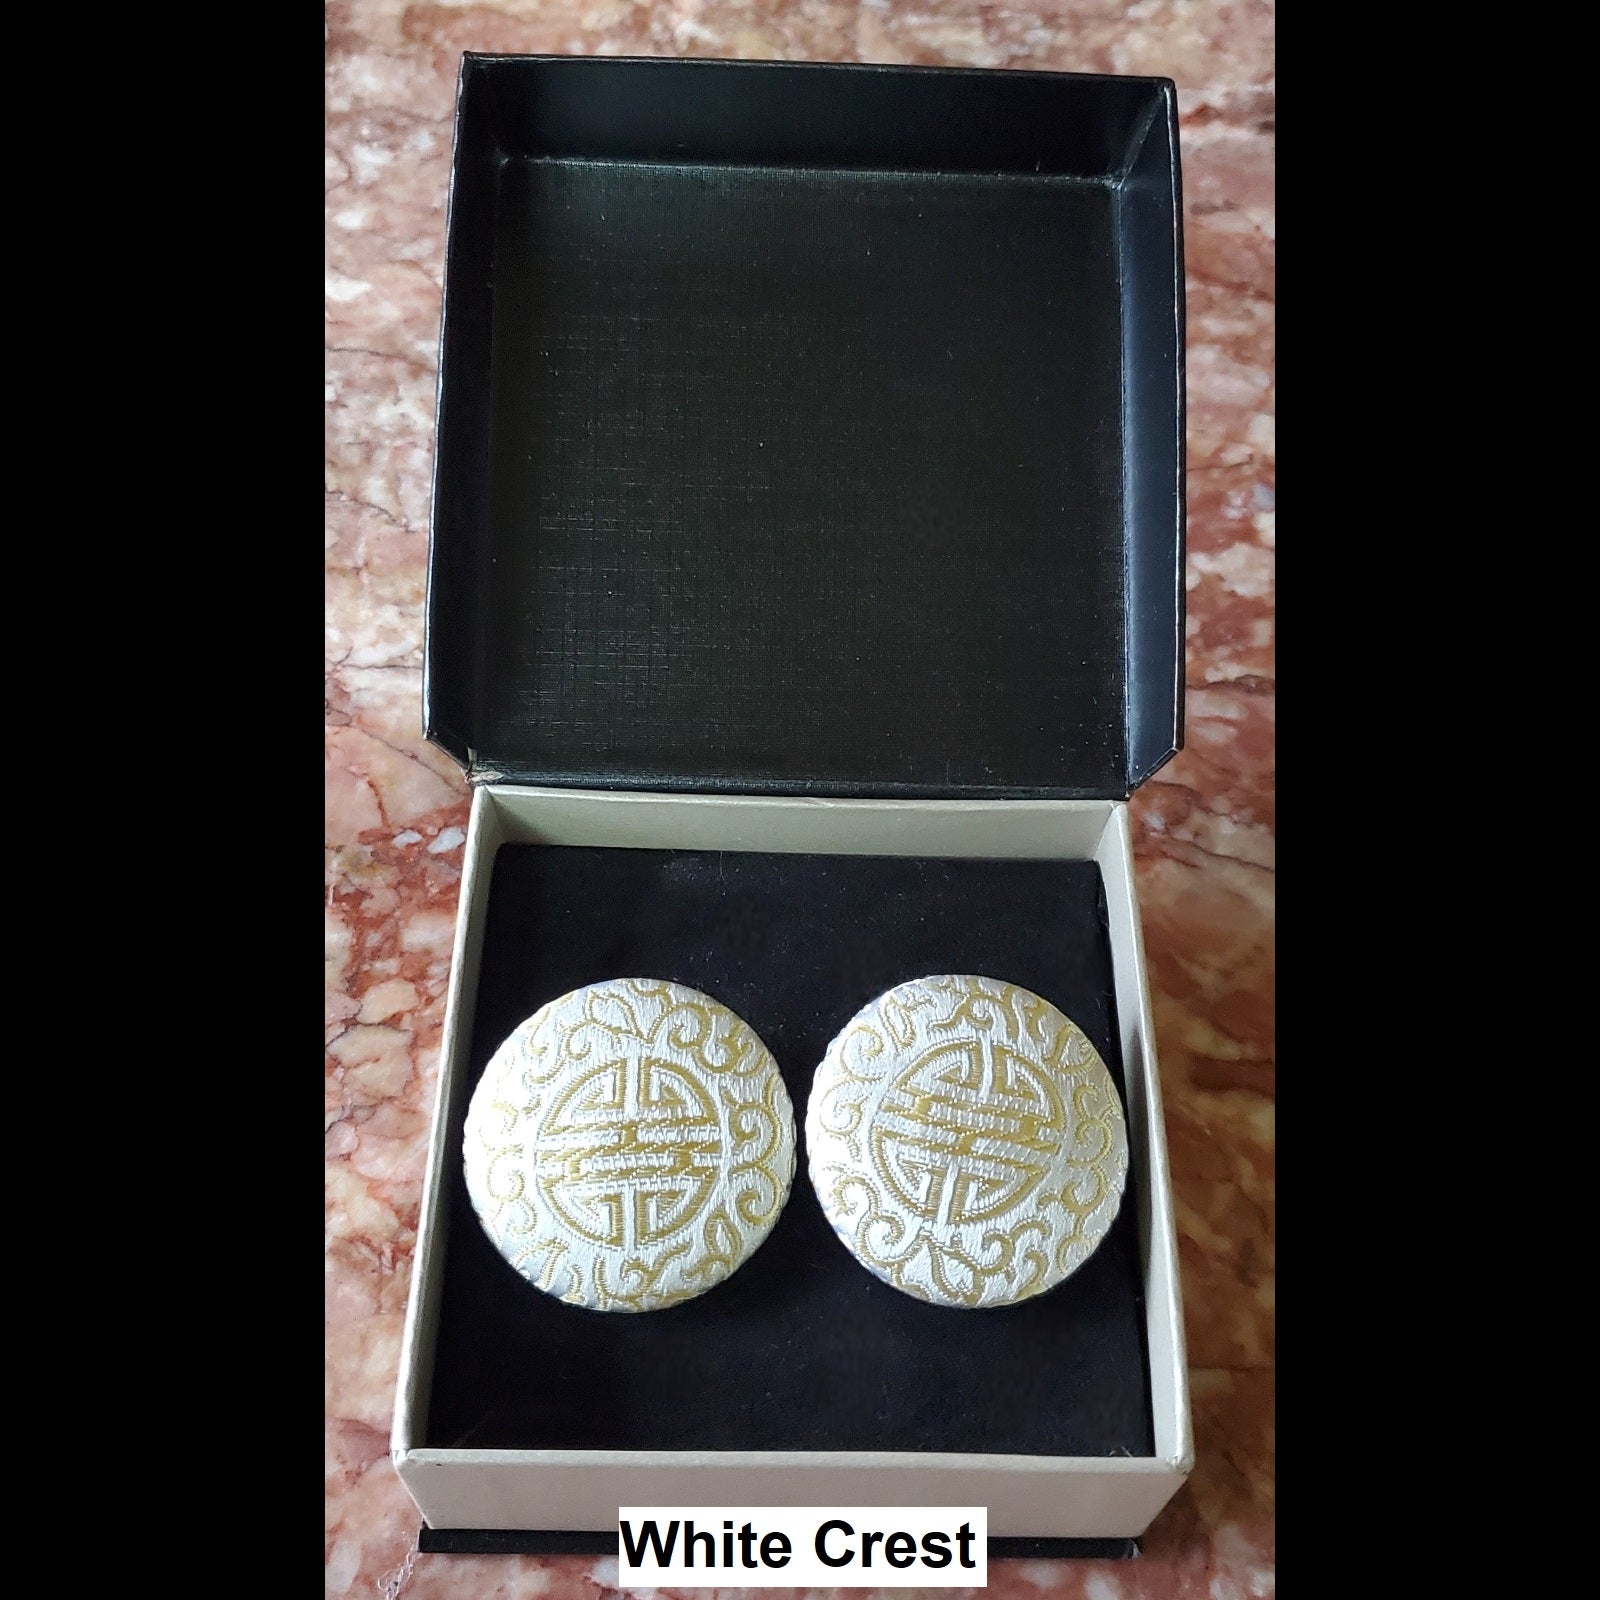 White crest print button earrings in jewelry box